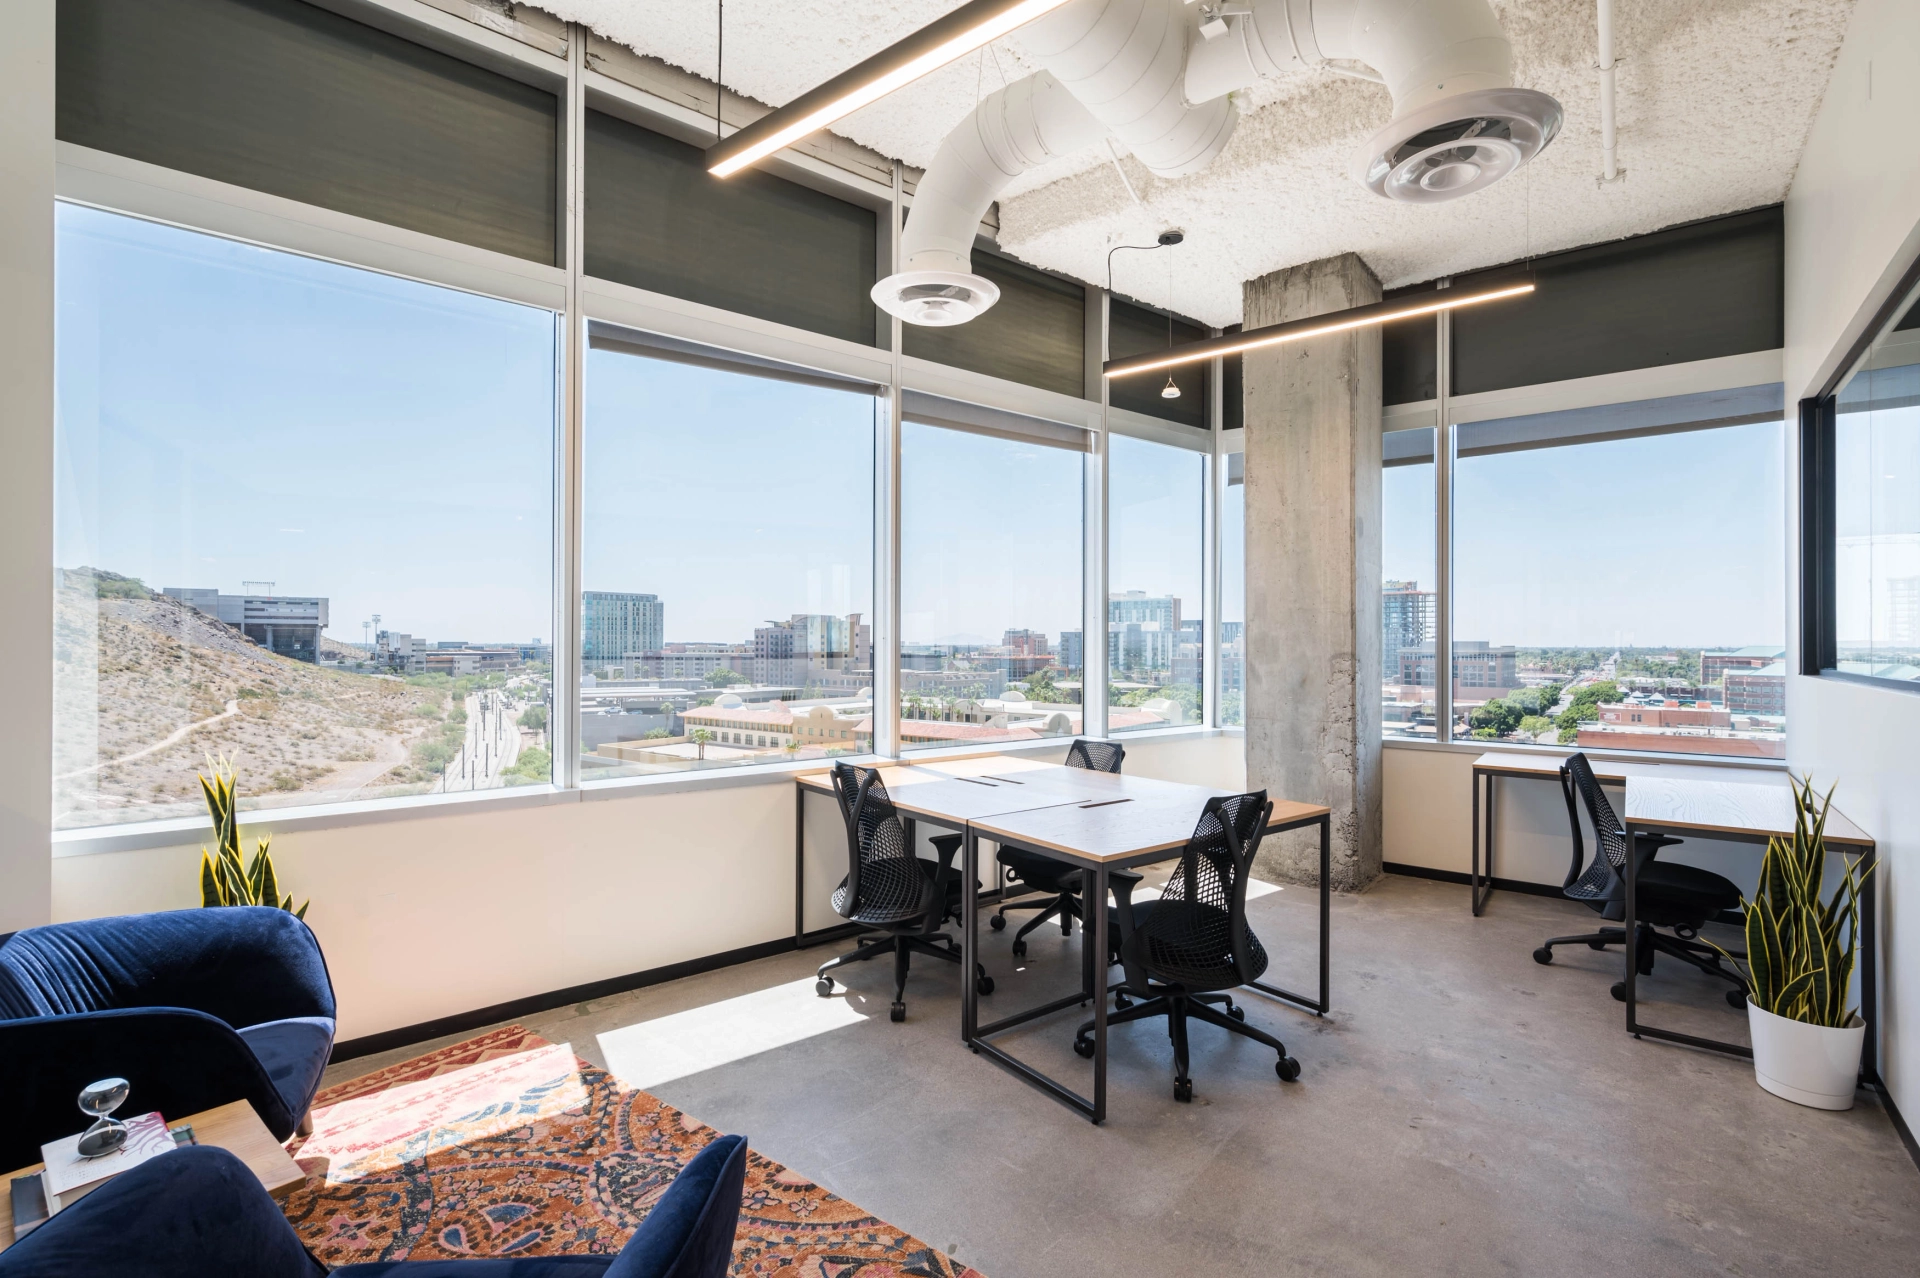 An office in Tempe with large windows overlooking the city.